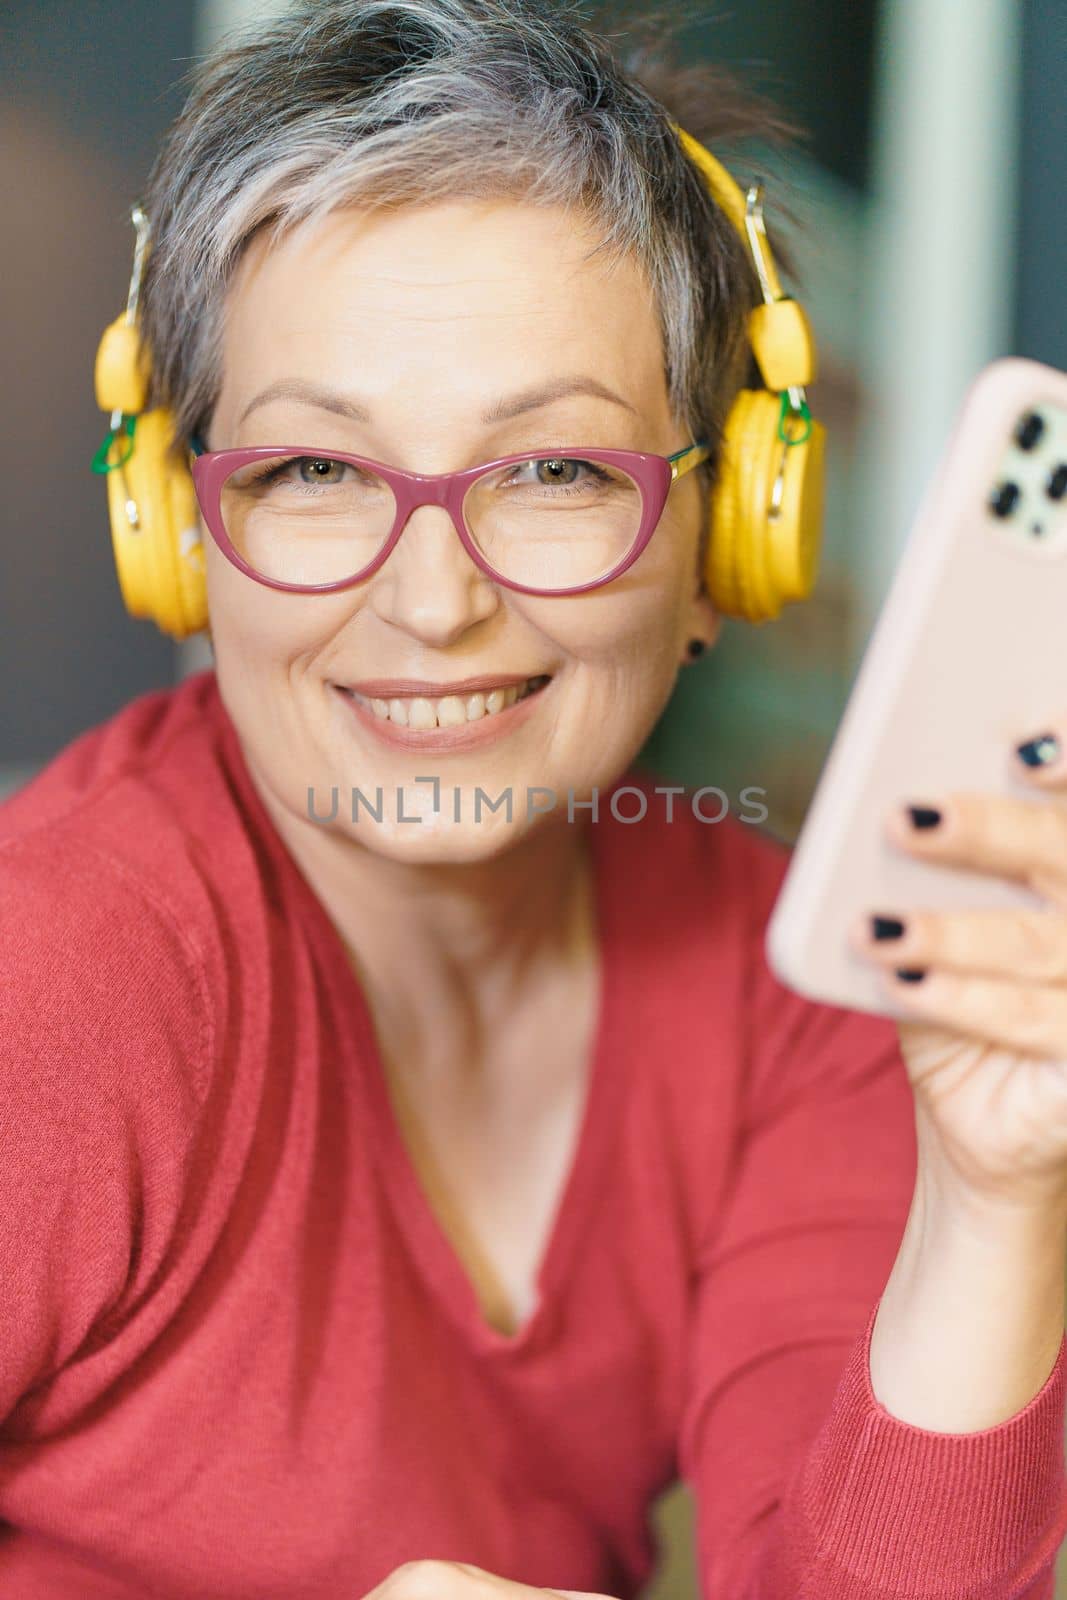 Mature woman wearing glasses, smiling and holding phone headphones on. Image portrays technology, communication, and entertainment, while woman's happy expression reflects her enjoyment and satisfaction with modernity. High quality photo